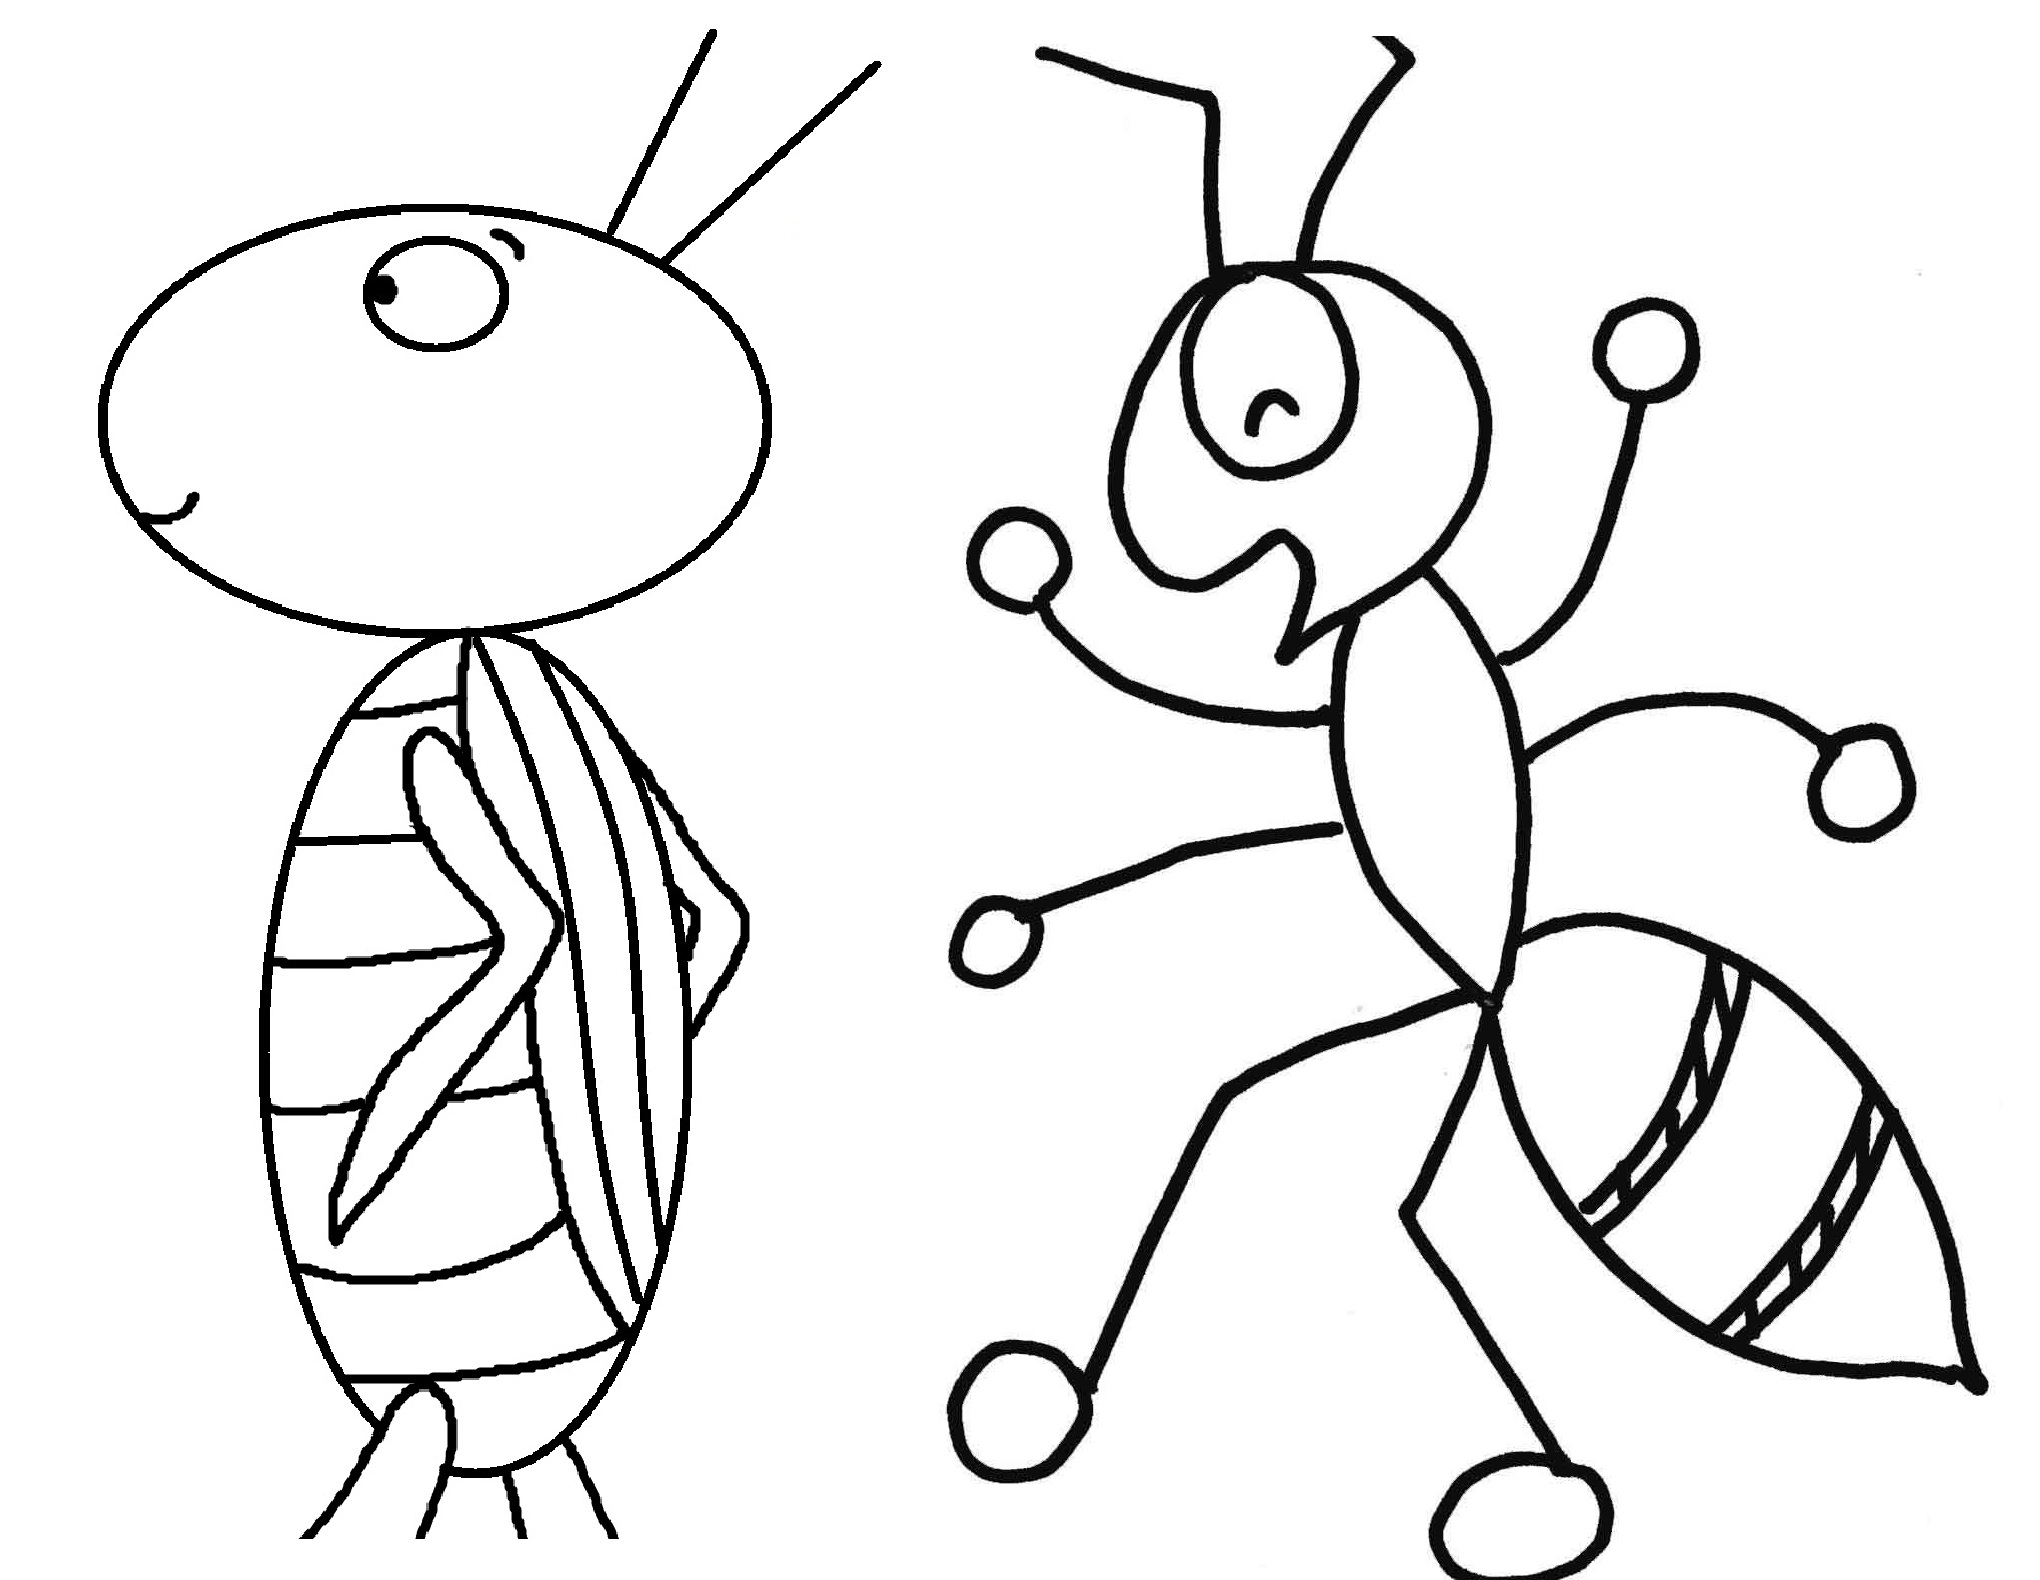 Ants clipart coloring. New ant page collection